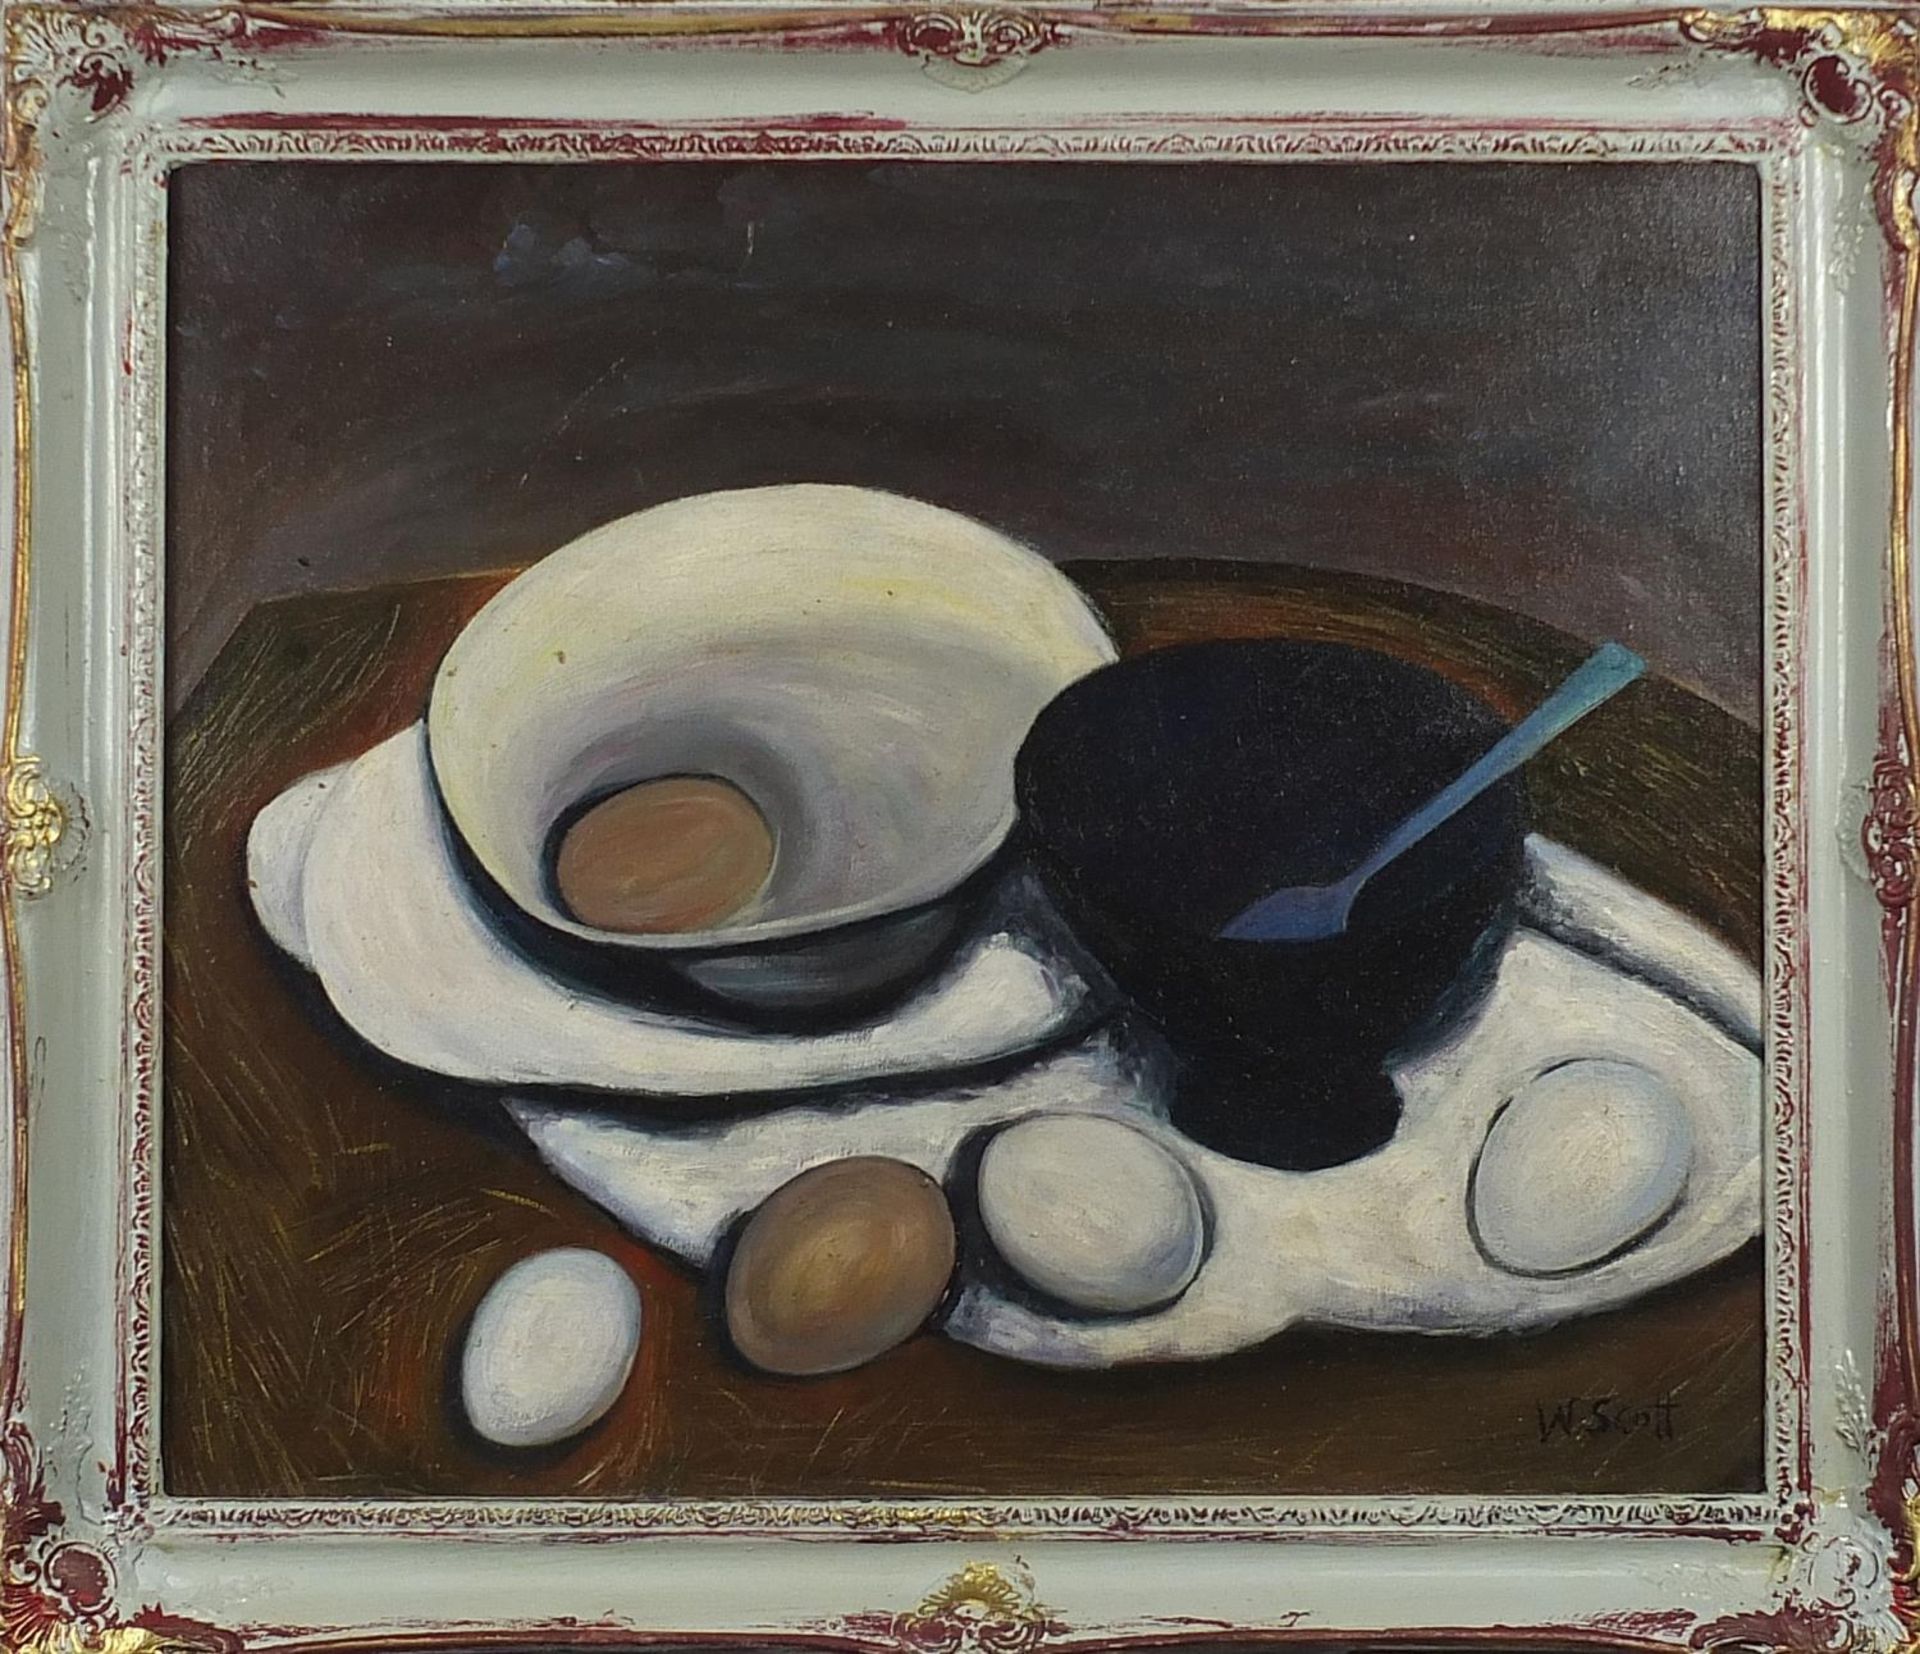 Still life vessels and eggs, Modern British oil on board, mounted and framed, 59.5cm x 49.5cm - Image 2 of 4